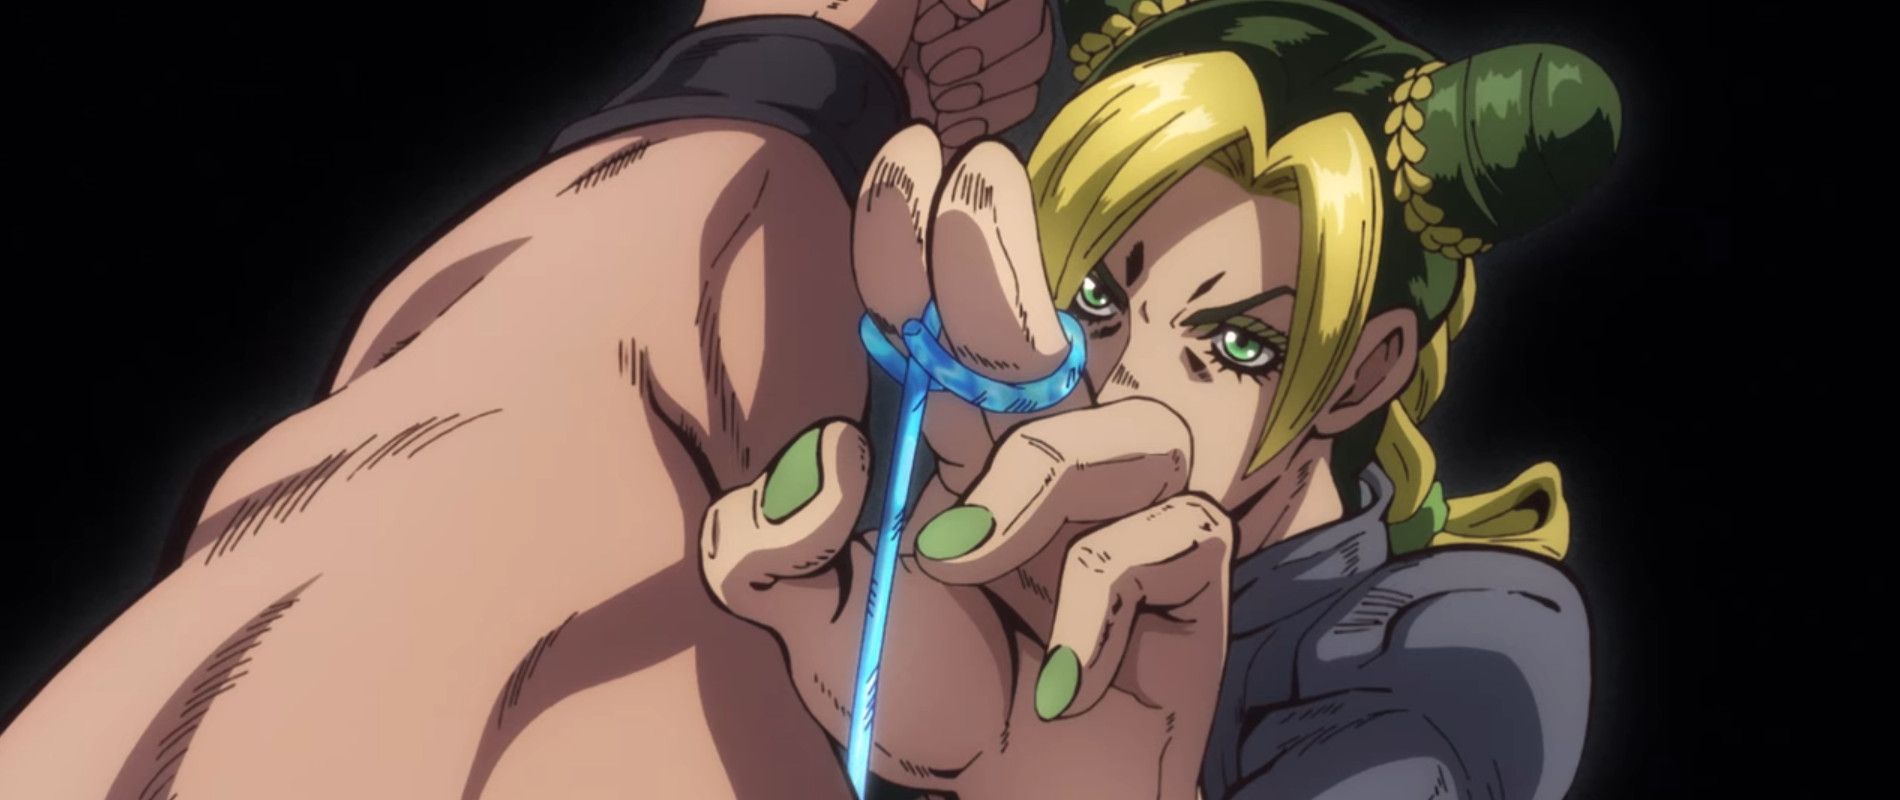 Jolyne Cujoh deflecting with string